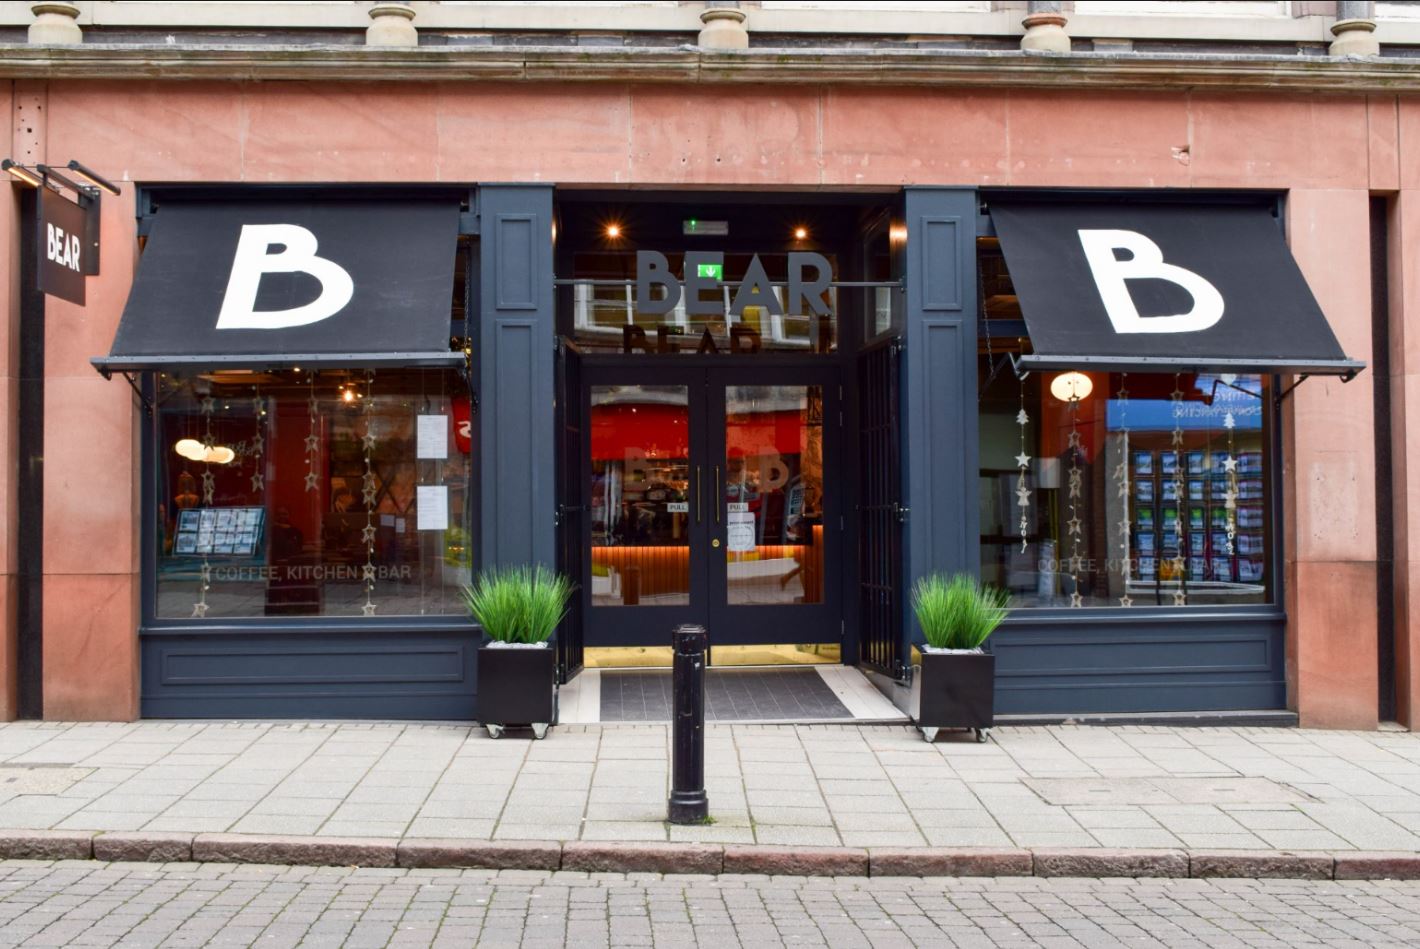 EATERY REVIEW: BEAR, DERBY